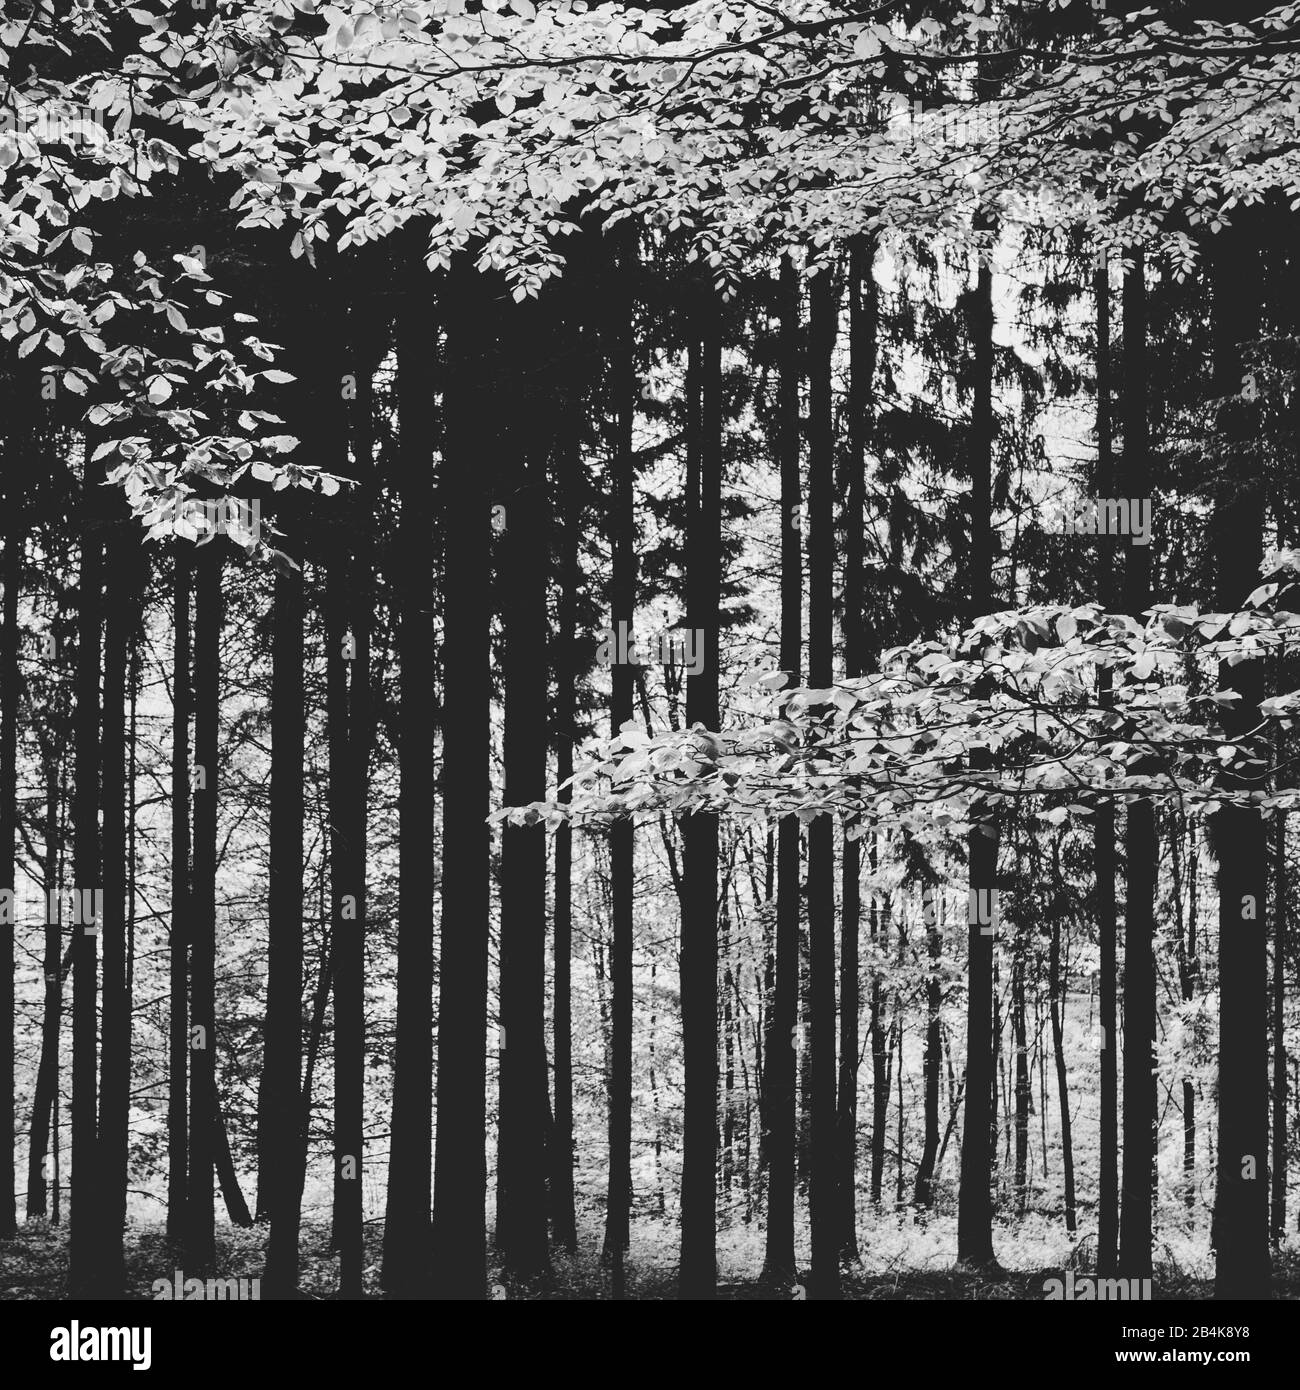 Deciduous trees in the forest, black and white Stock Photo